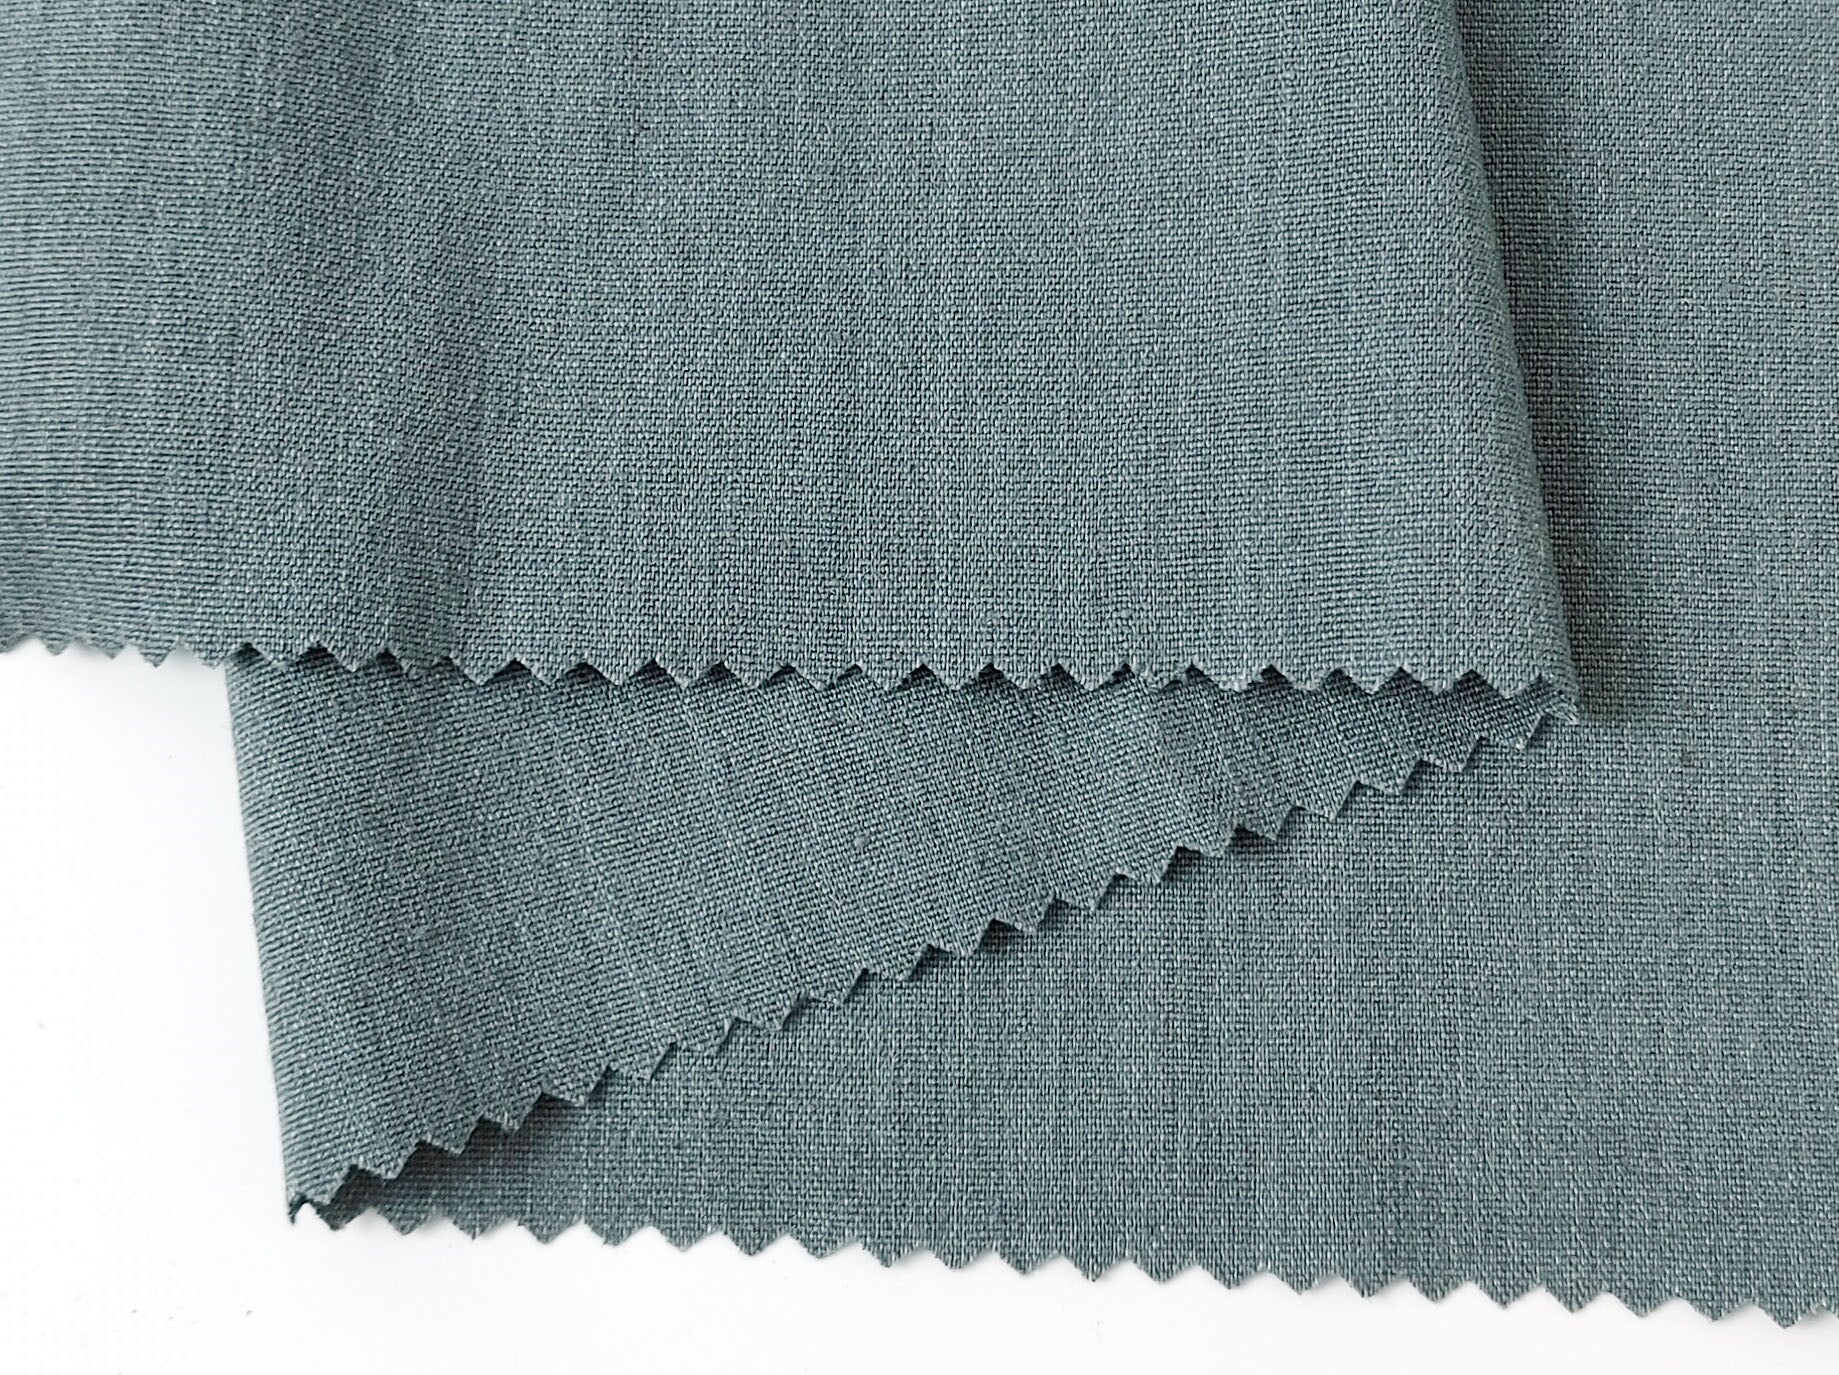 Donna Linen - High Density Linen Rayon Stretch Fabric 4025 4024 5982 4803 4579 4578 4023 3978 - The Linen Lab - Gray